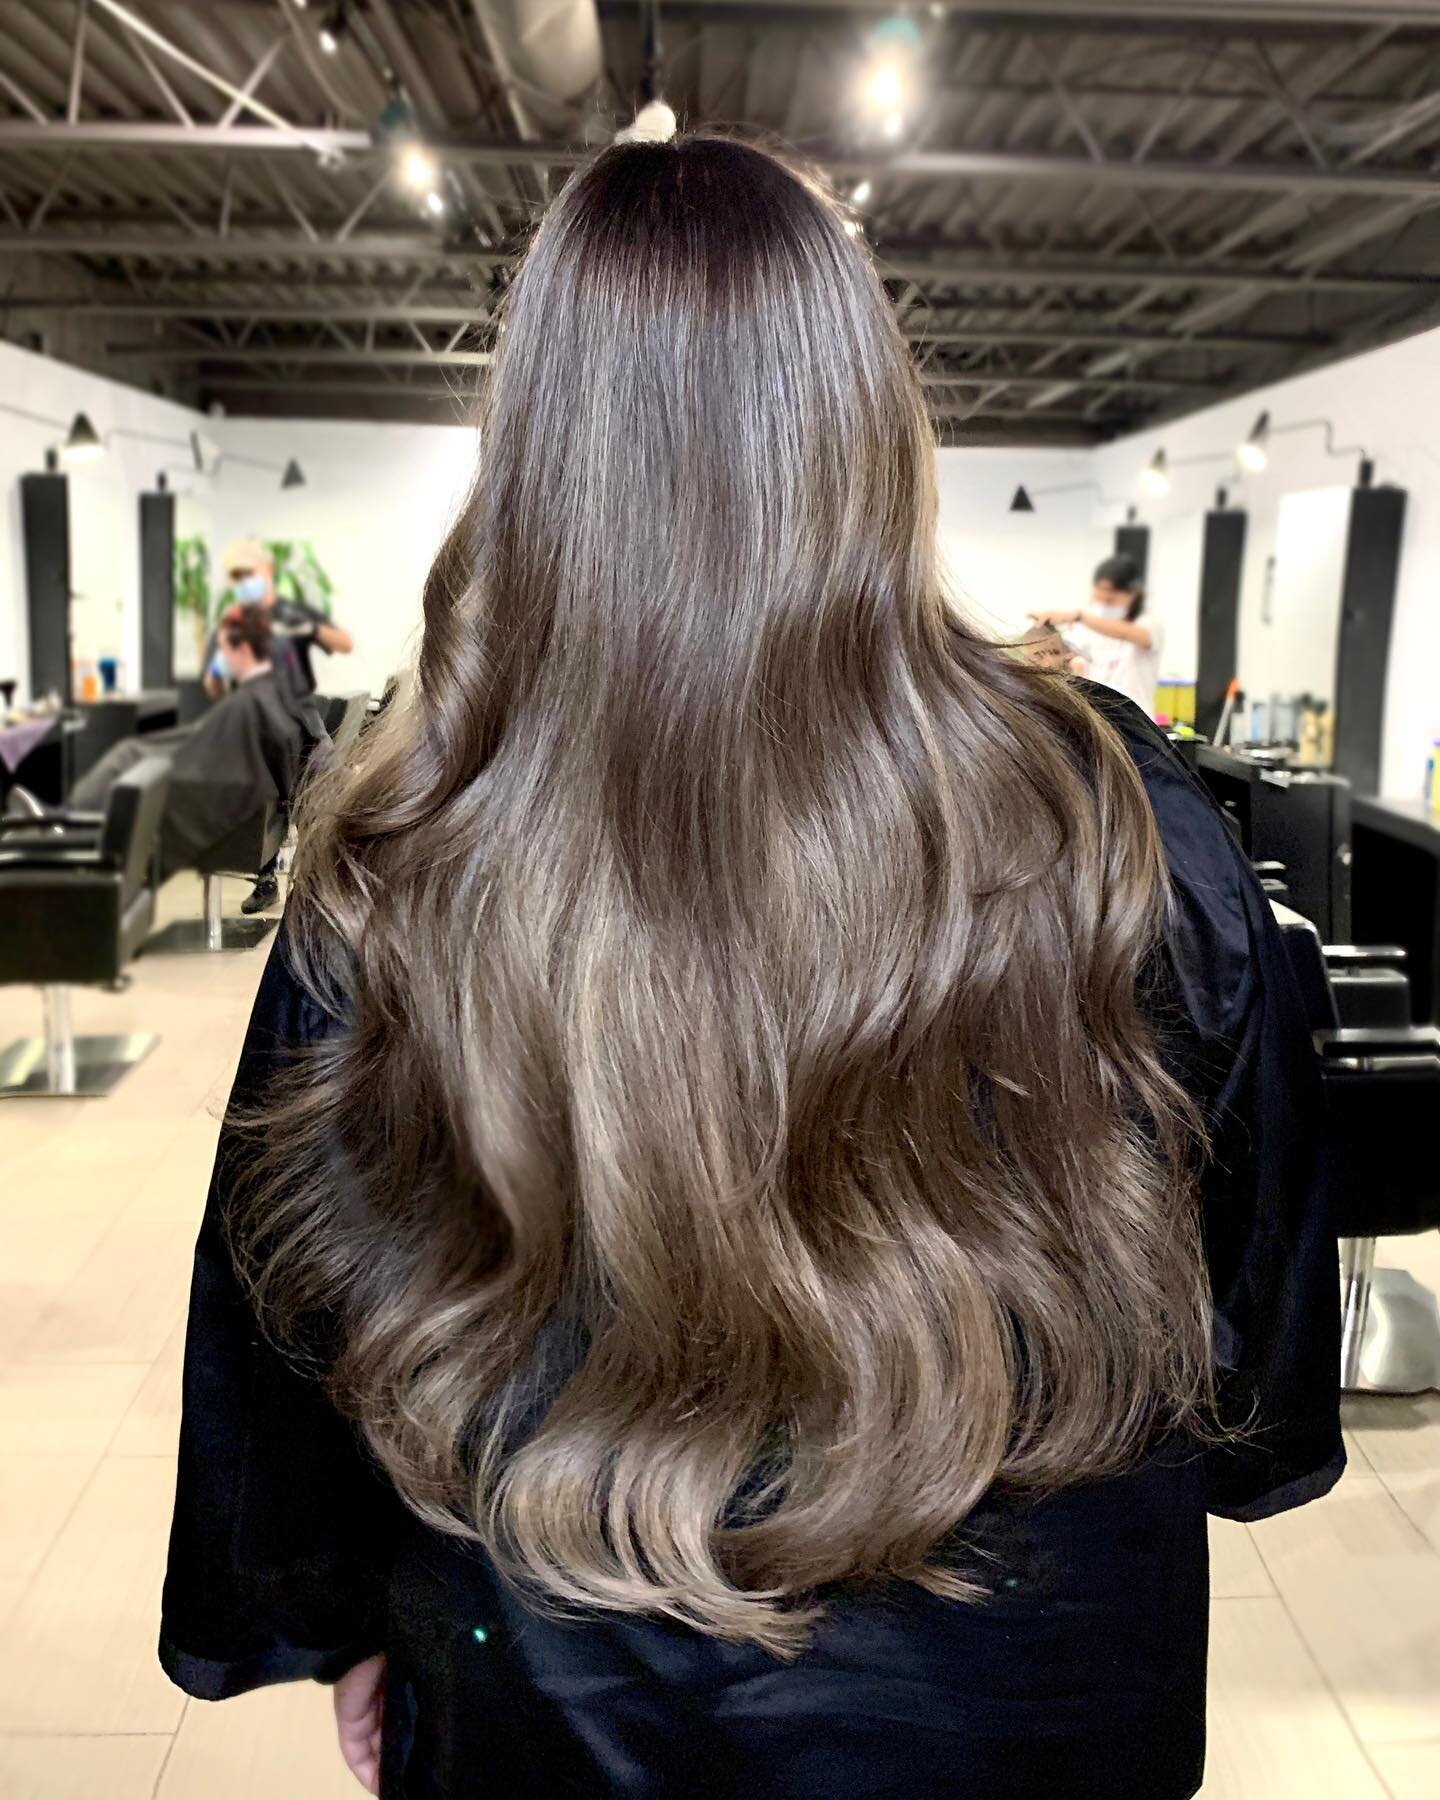 &bull; Even though warmer colours are being embraced these days&hellip; (YAY!) we still love a good smokey ash brown on long luscious hair. Swipe for her before! 😮&zwj;💨
⠀⠀⠀⠀⠀⠀⠀⠀⠀
5 hrs &bull; Balayage, Cut &amp; Style by: Thanh @thanh3rz 
⠀⠀⠀⠀⠀⠀⠀⠀